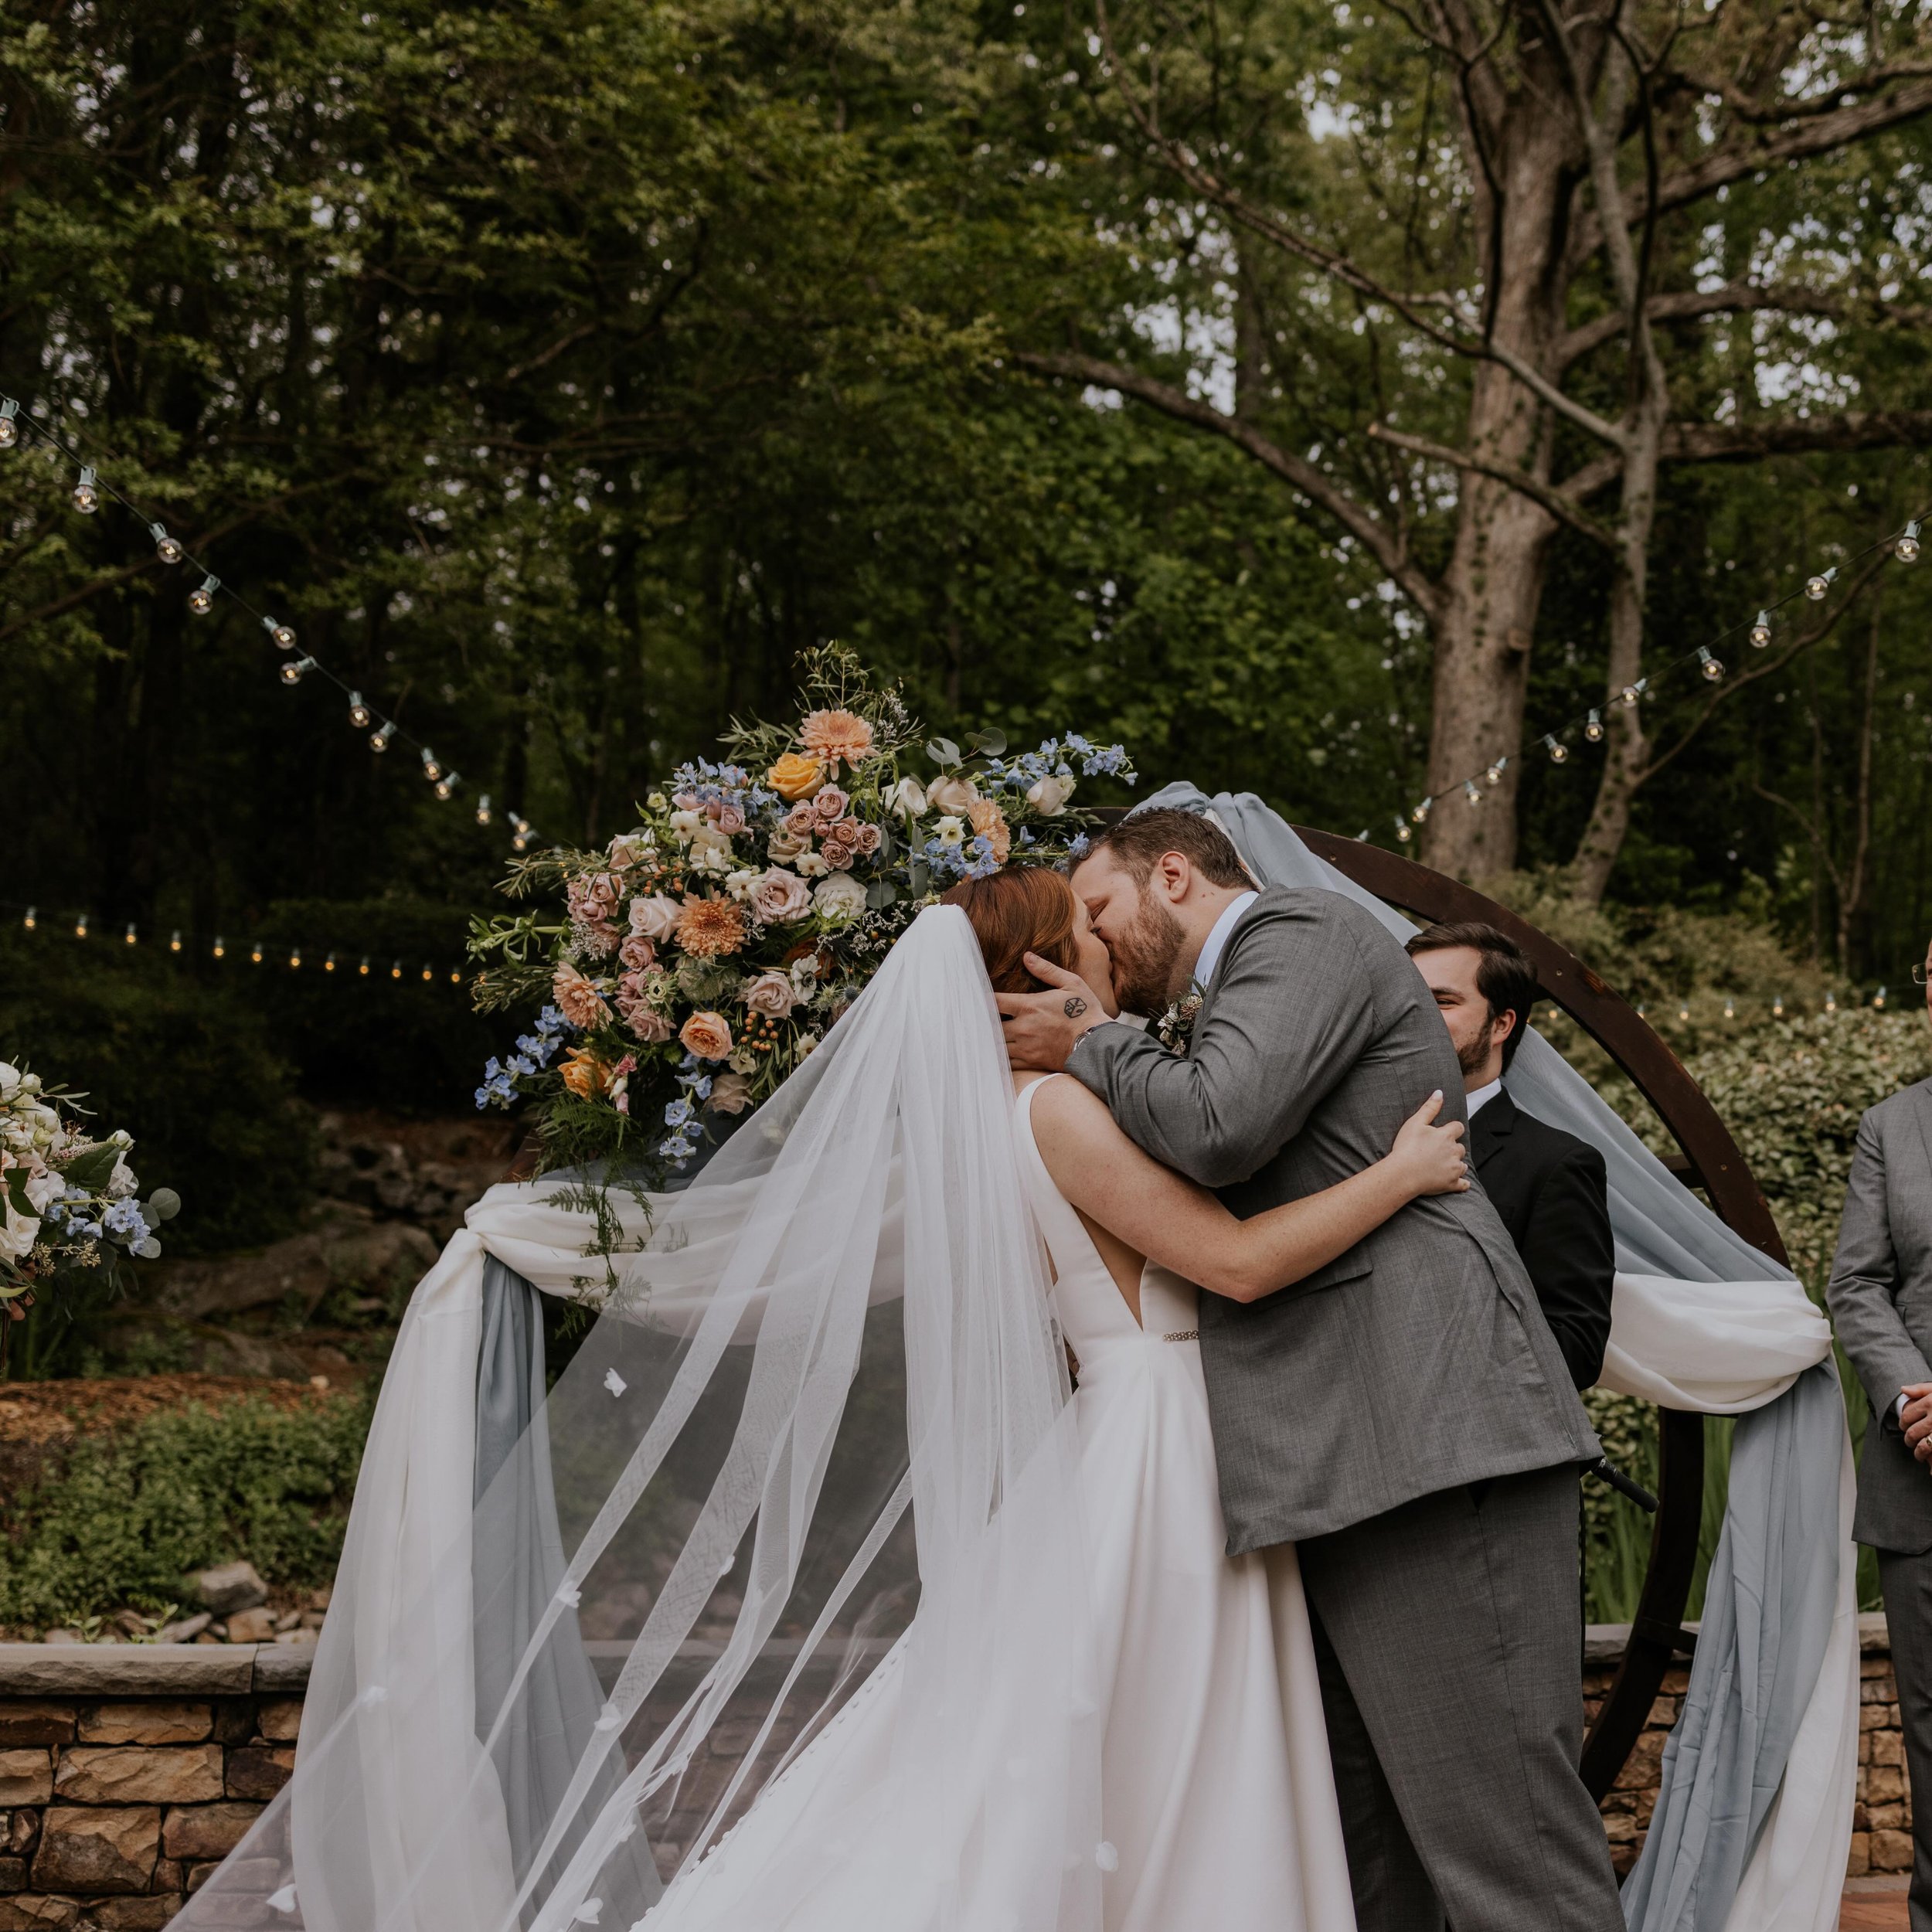 Saturdays are for sultry smooches 💋 
This stunning garden ceremony was sealed with a passionate kiss! Come explore all the Little Gardens has to offer for you special day by clicking the link in our profile to schedule a tour.

Photo: @haileyhighpho